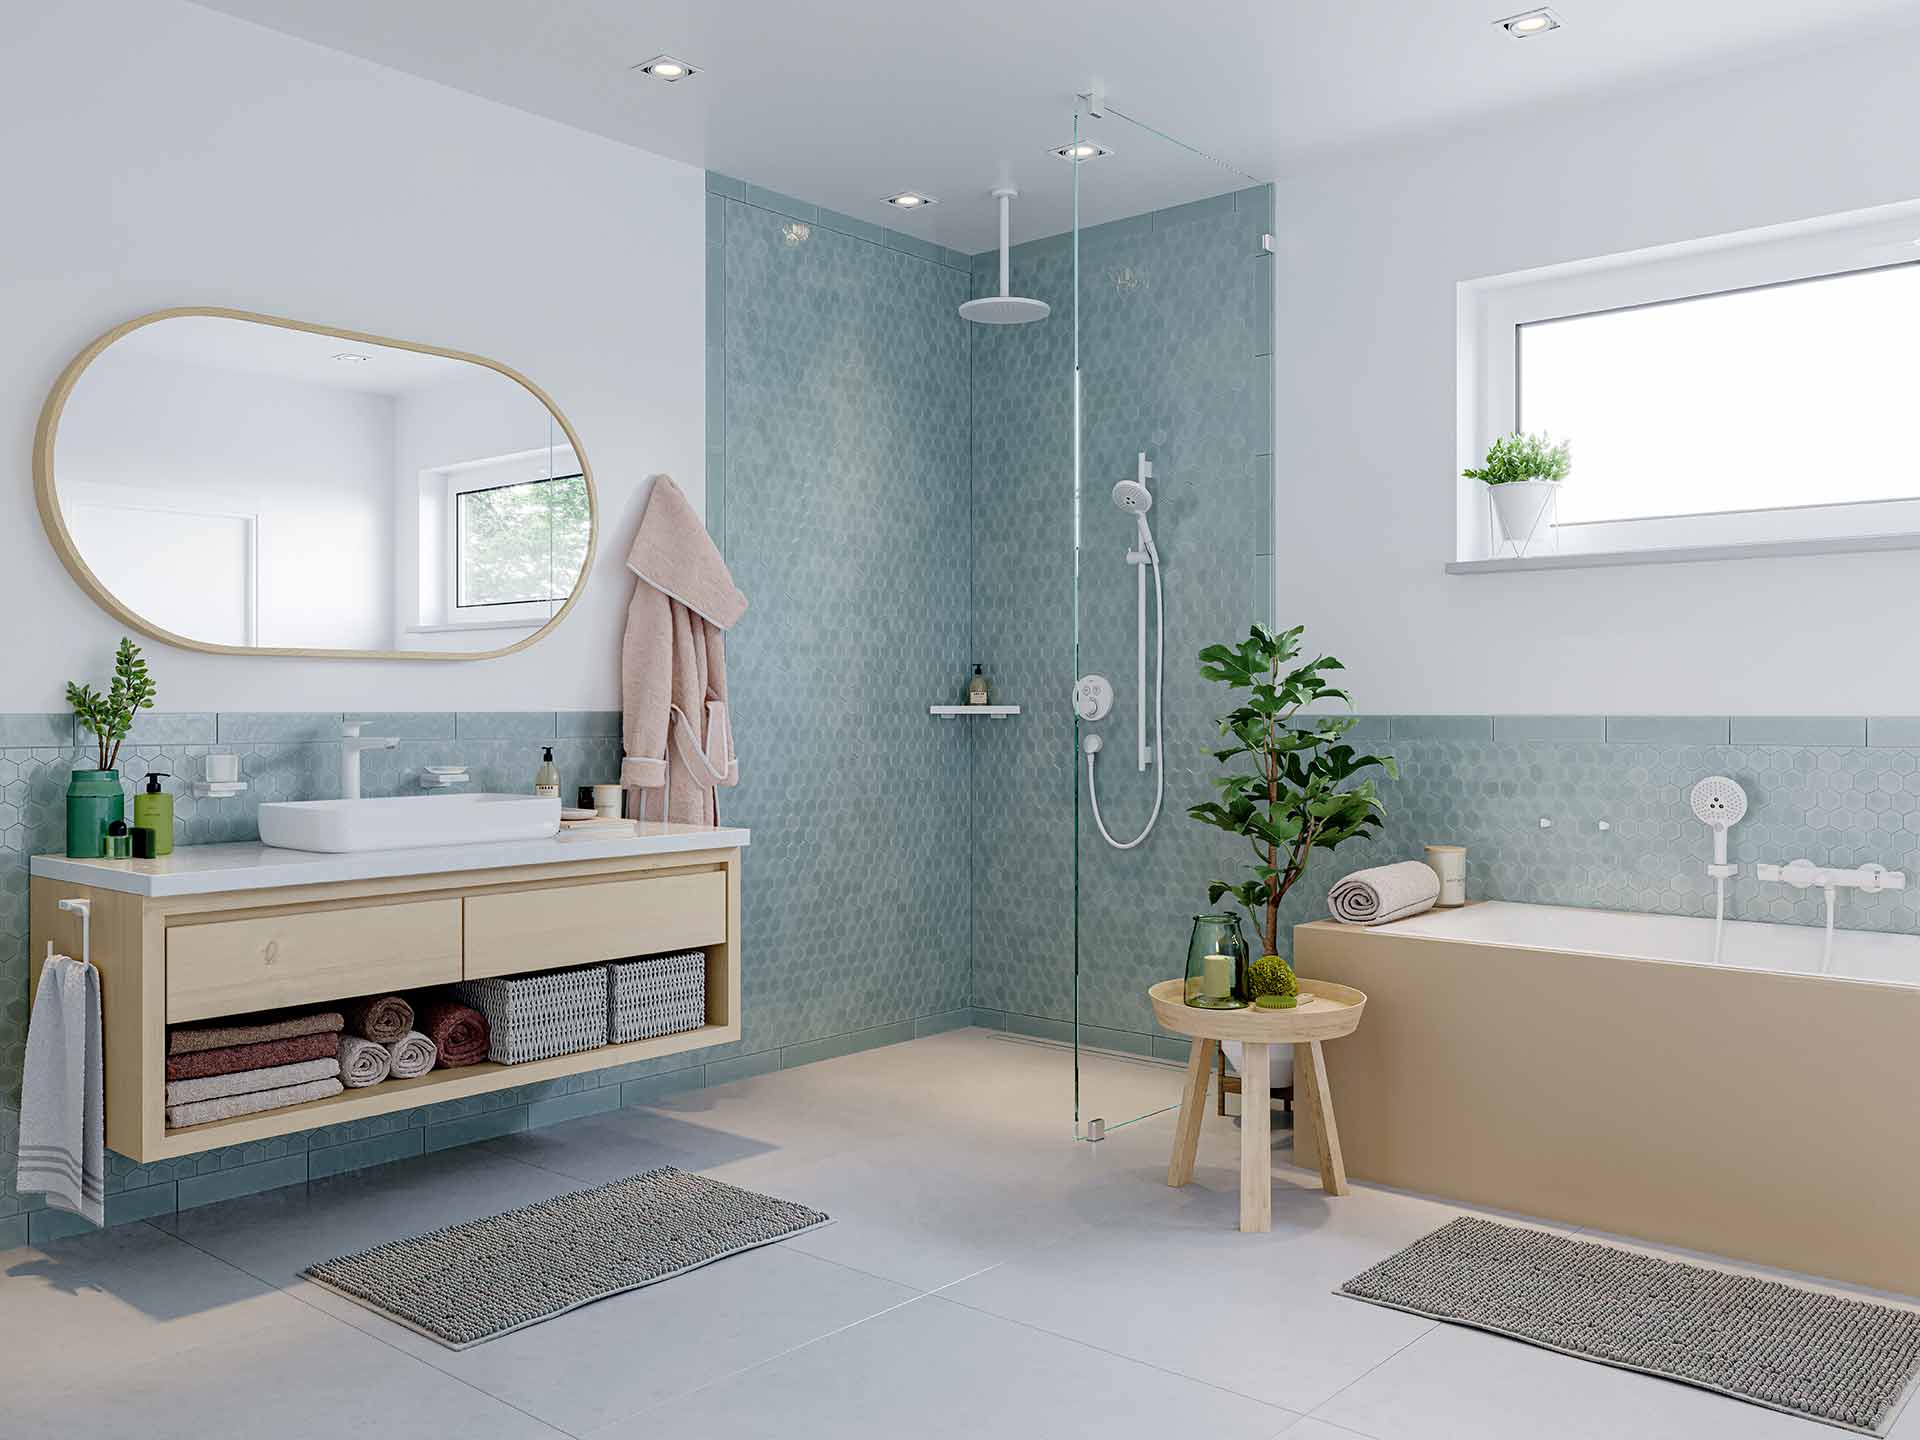 How to plan your bathroom with skillful use of shapes, colors, and light